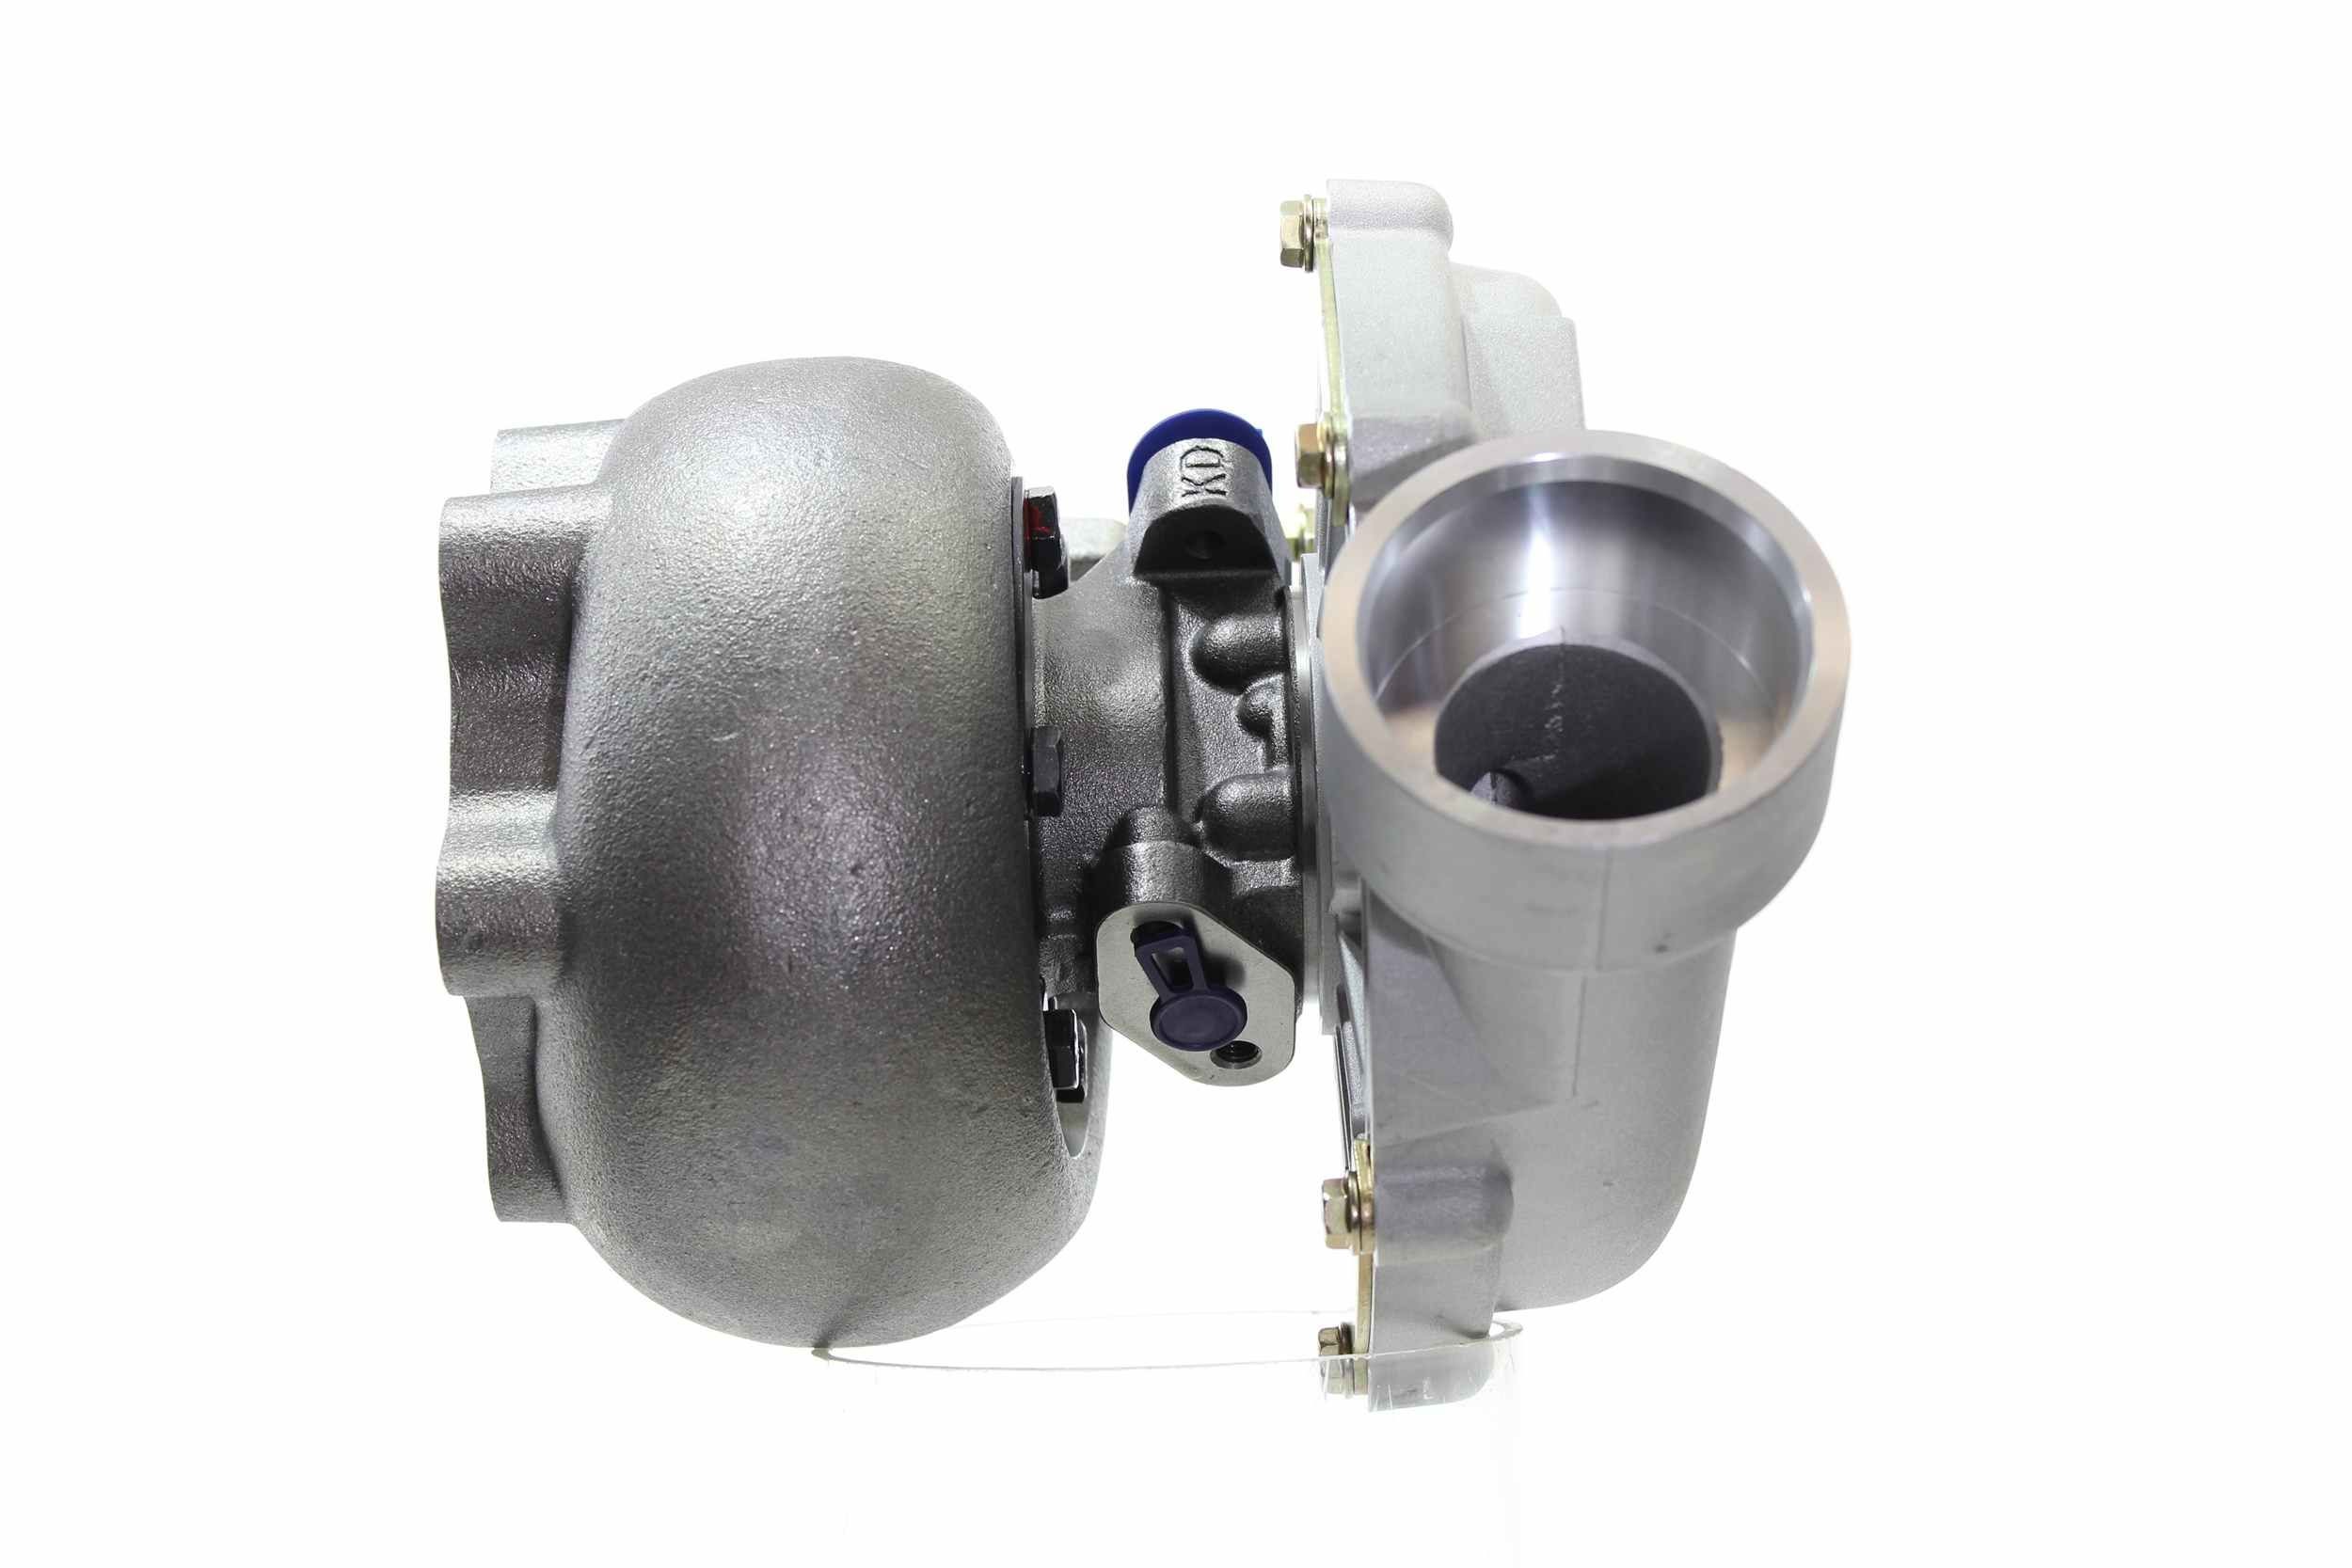 10900472 Turbocharger 900499 ALANKO Exhaust Turbocharger, Incl. Gasket Set, with attachment material